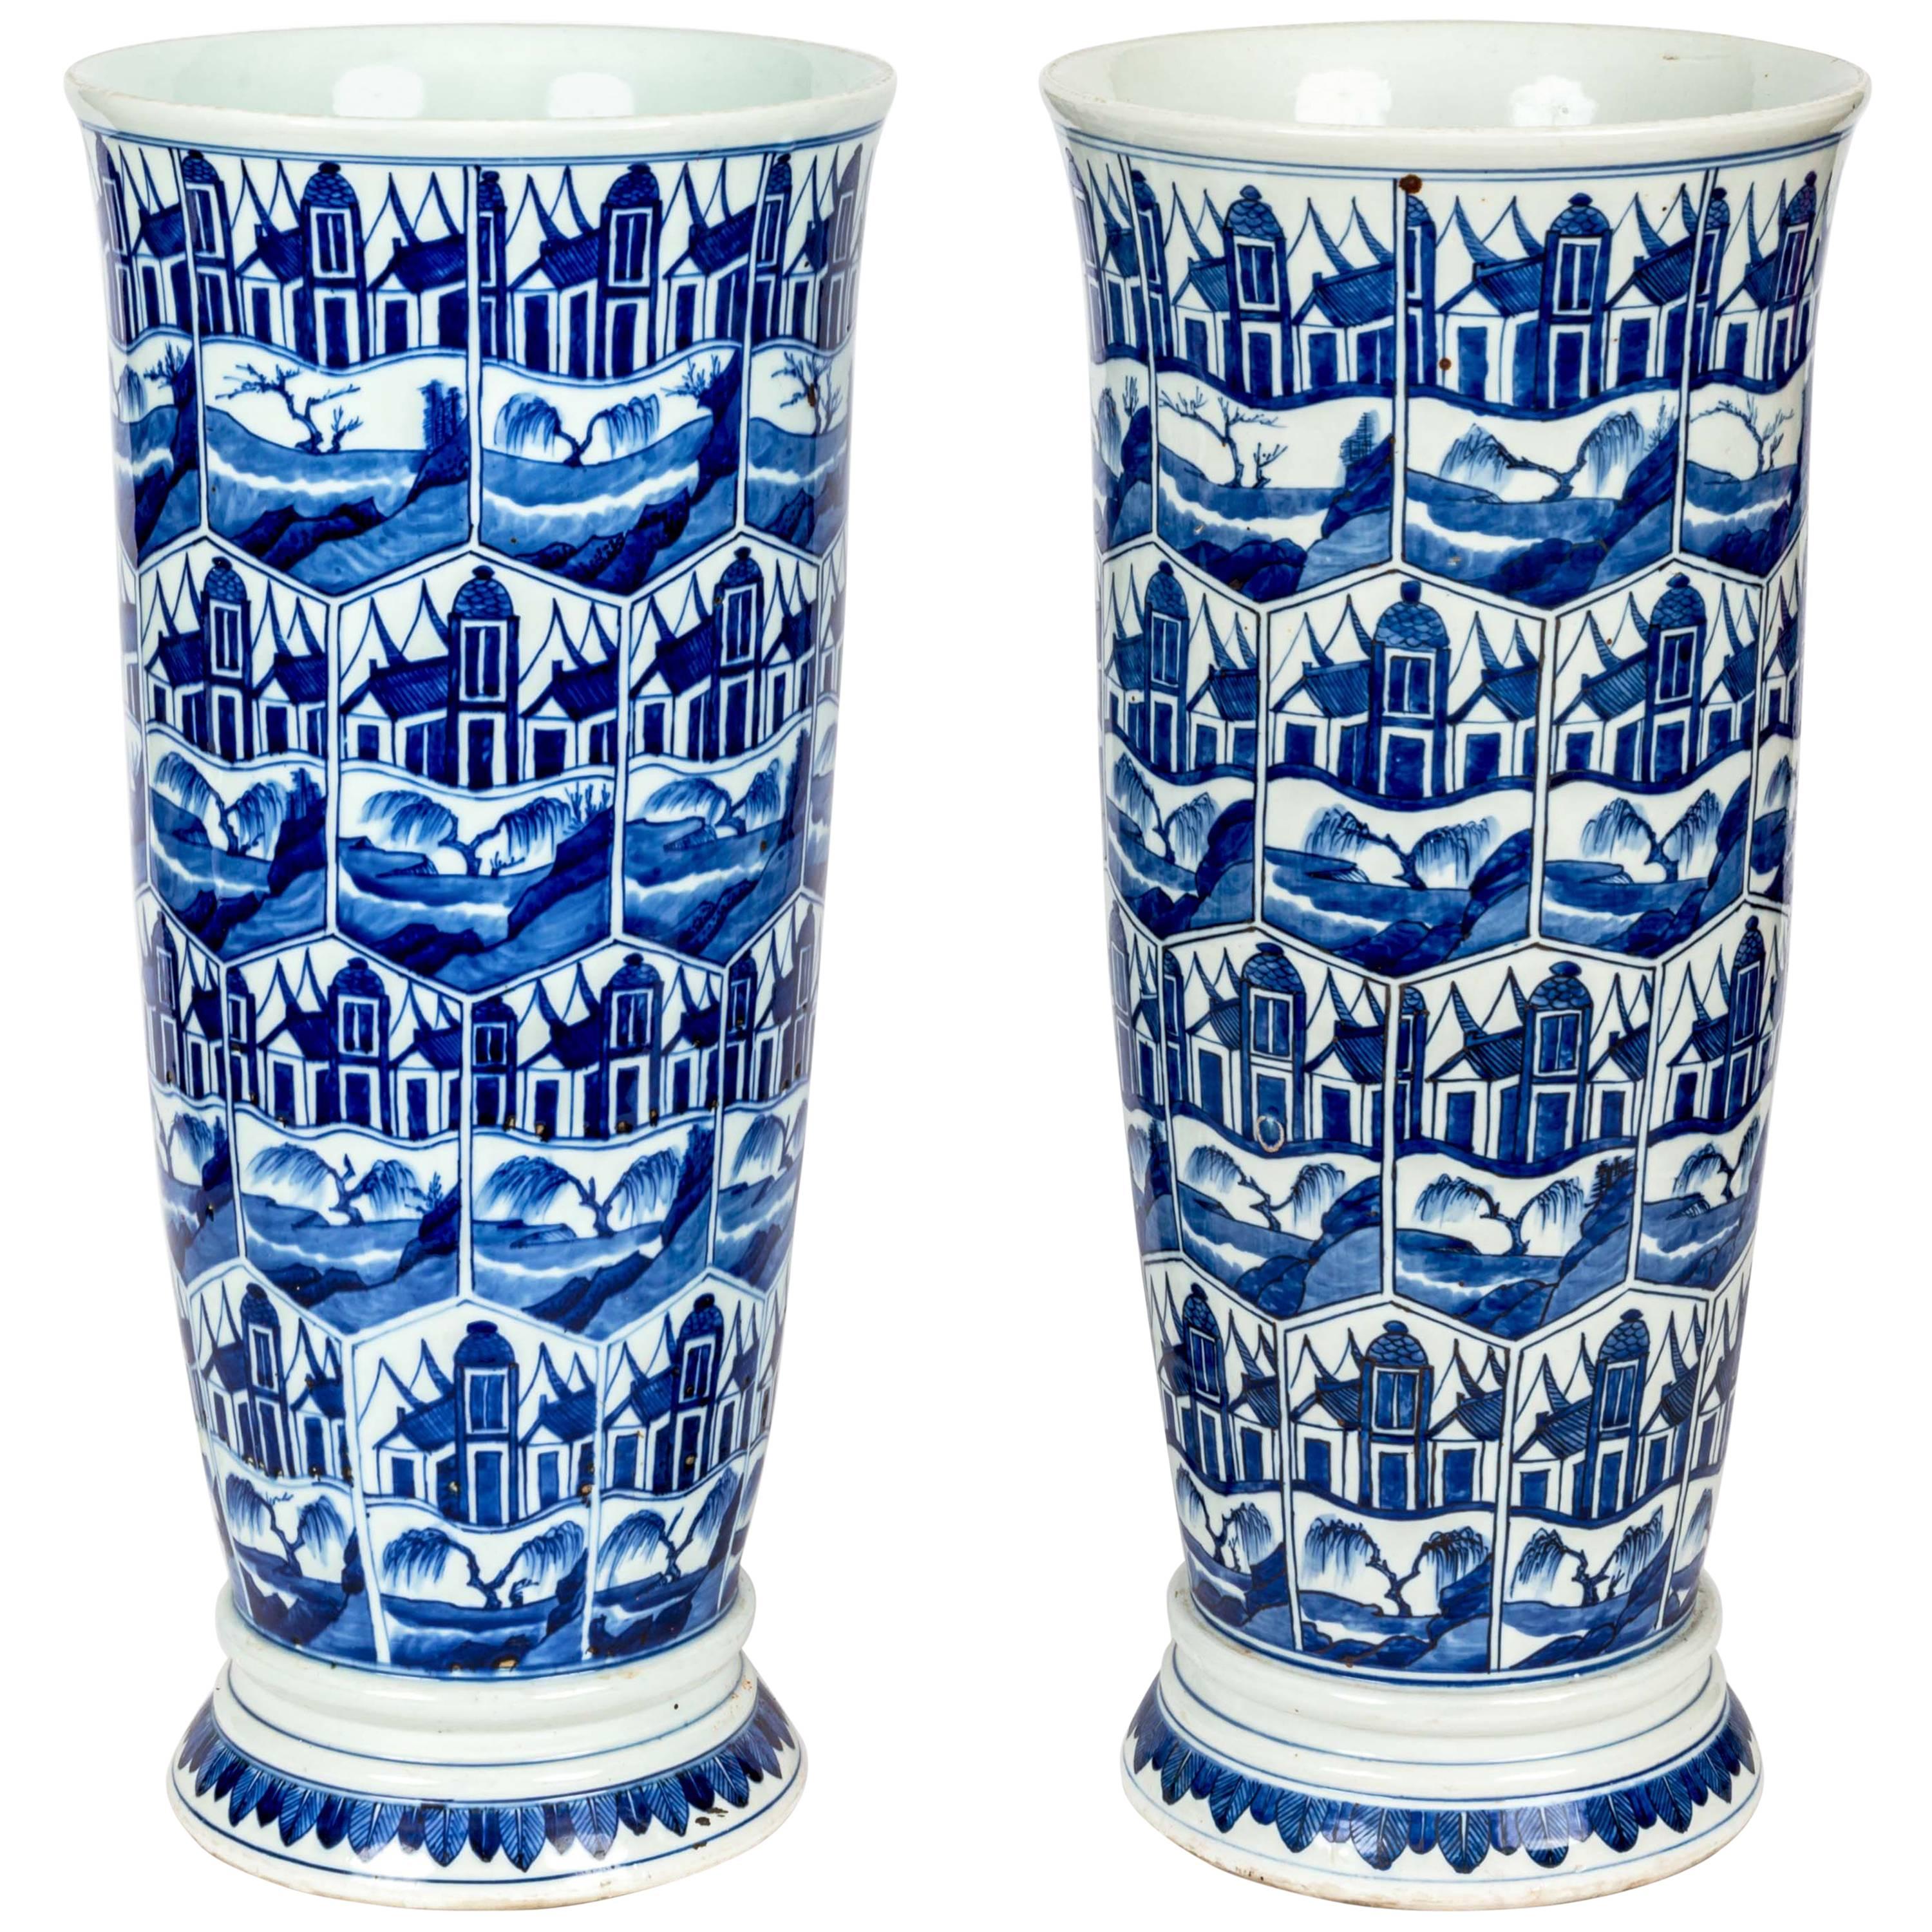 Pair of Blue and White Delft-Style Chinese Umbrella Stand